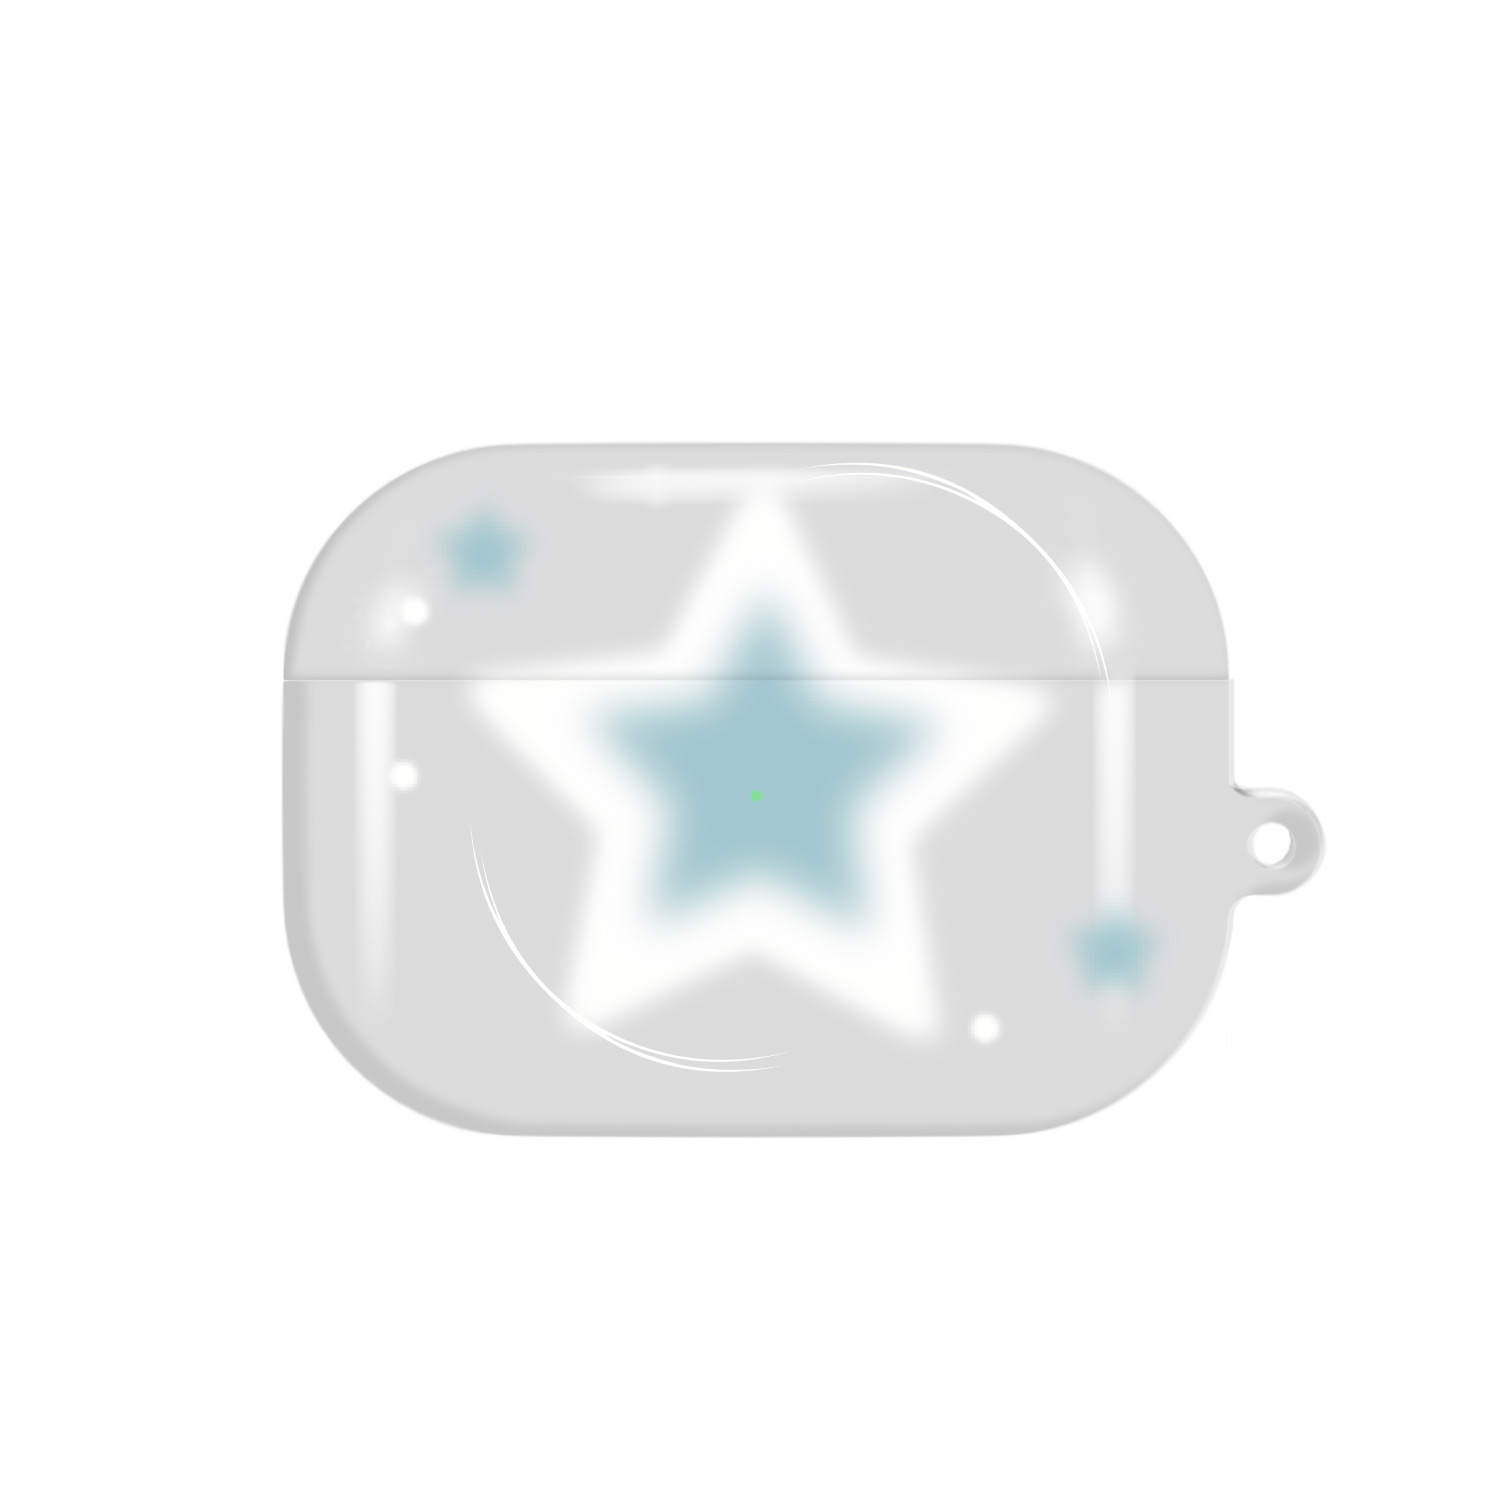 [airpods case] softstar airpods hardcase_fog blue